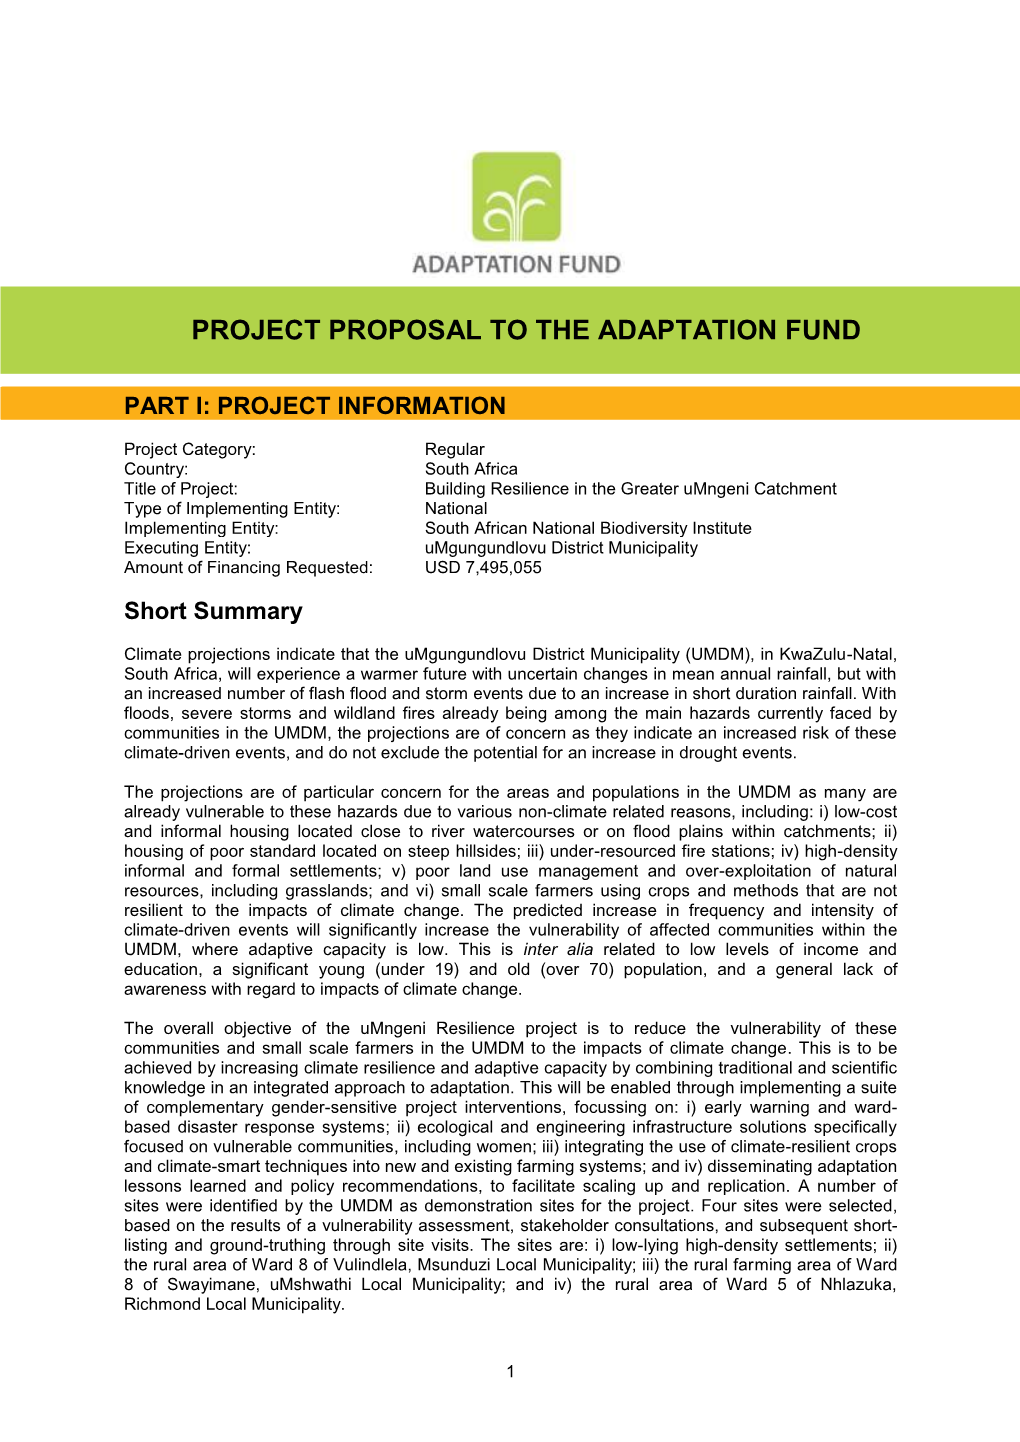 Project Proposal to the Adaptation Fund